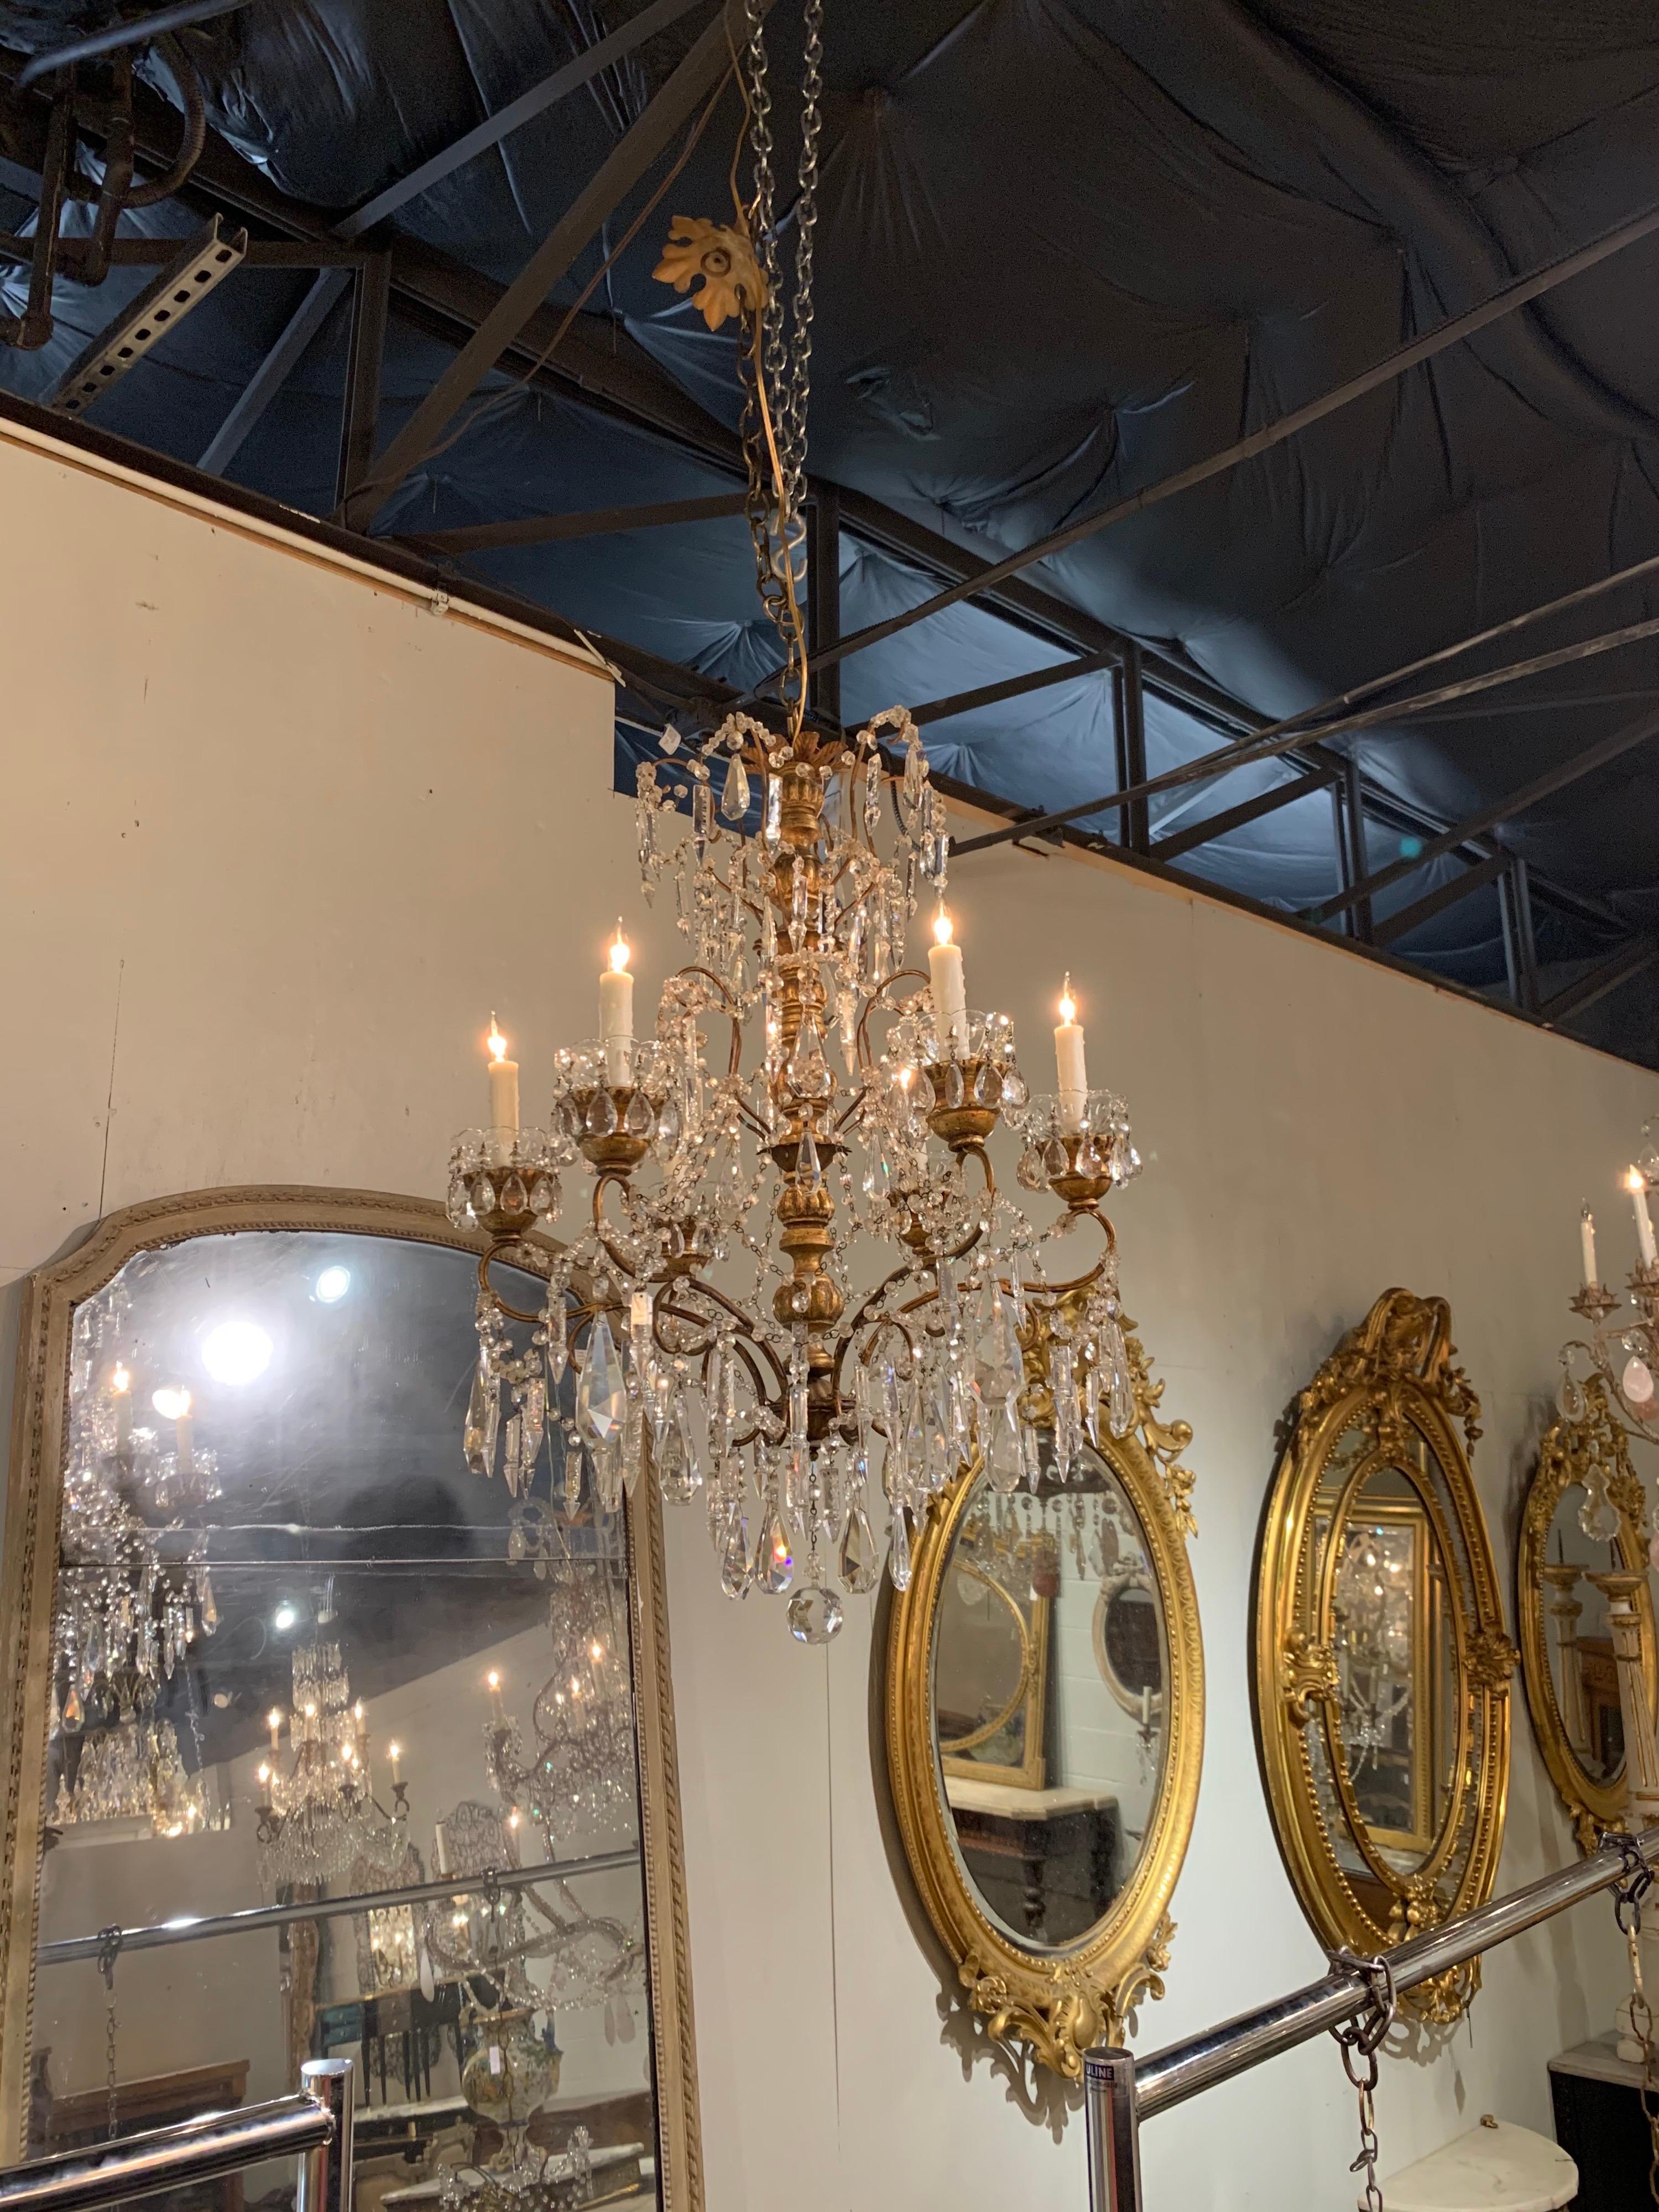 Very fine 19th century Italian giltwood and beaded chandelier with 6 lights. Beautiful giltwood base draped with a beautiful array of beads, crystals and prisms. So pretty!